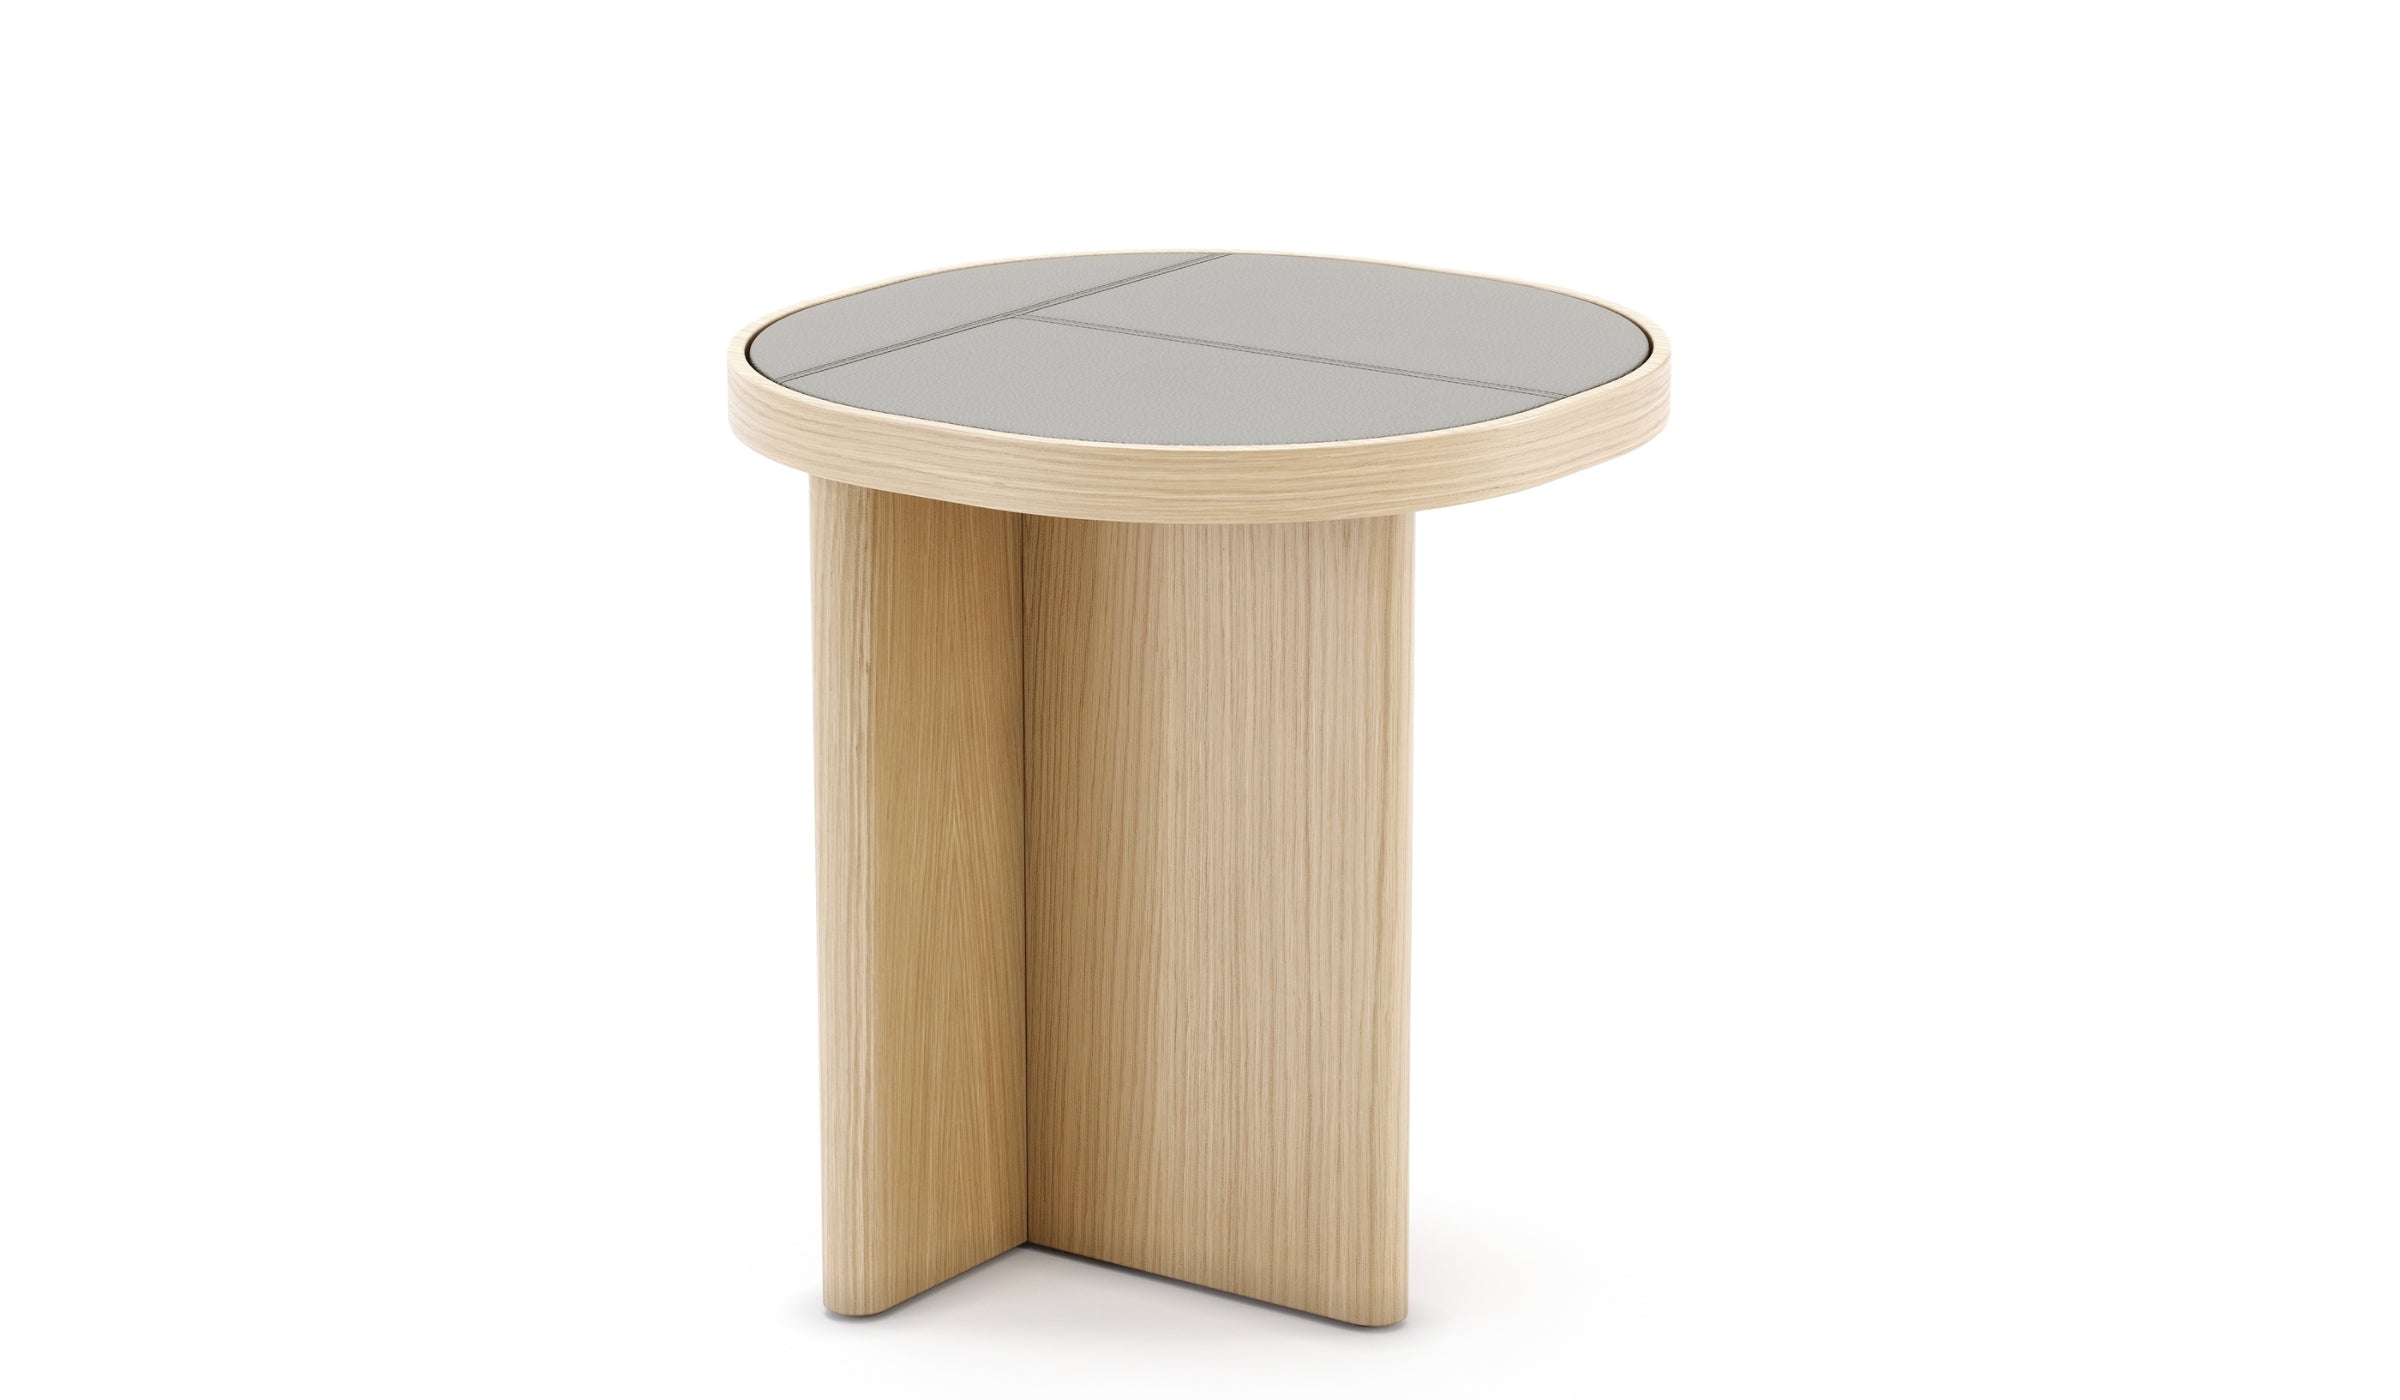 Gilbert - Side table, natural oak, elephant leather finish, S